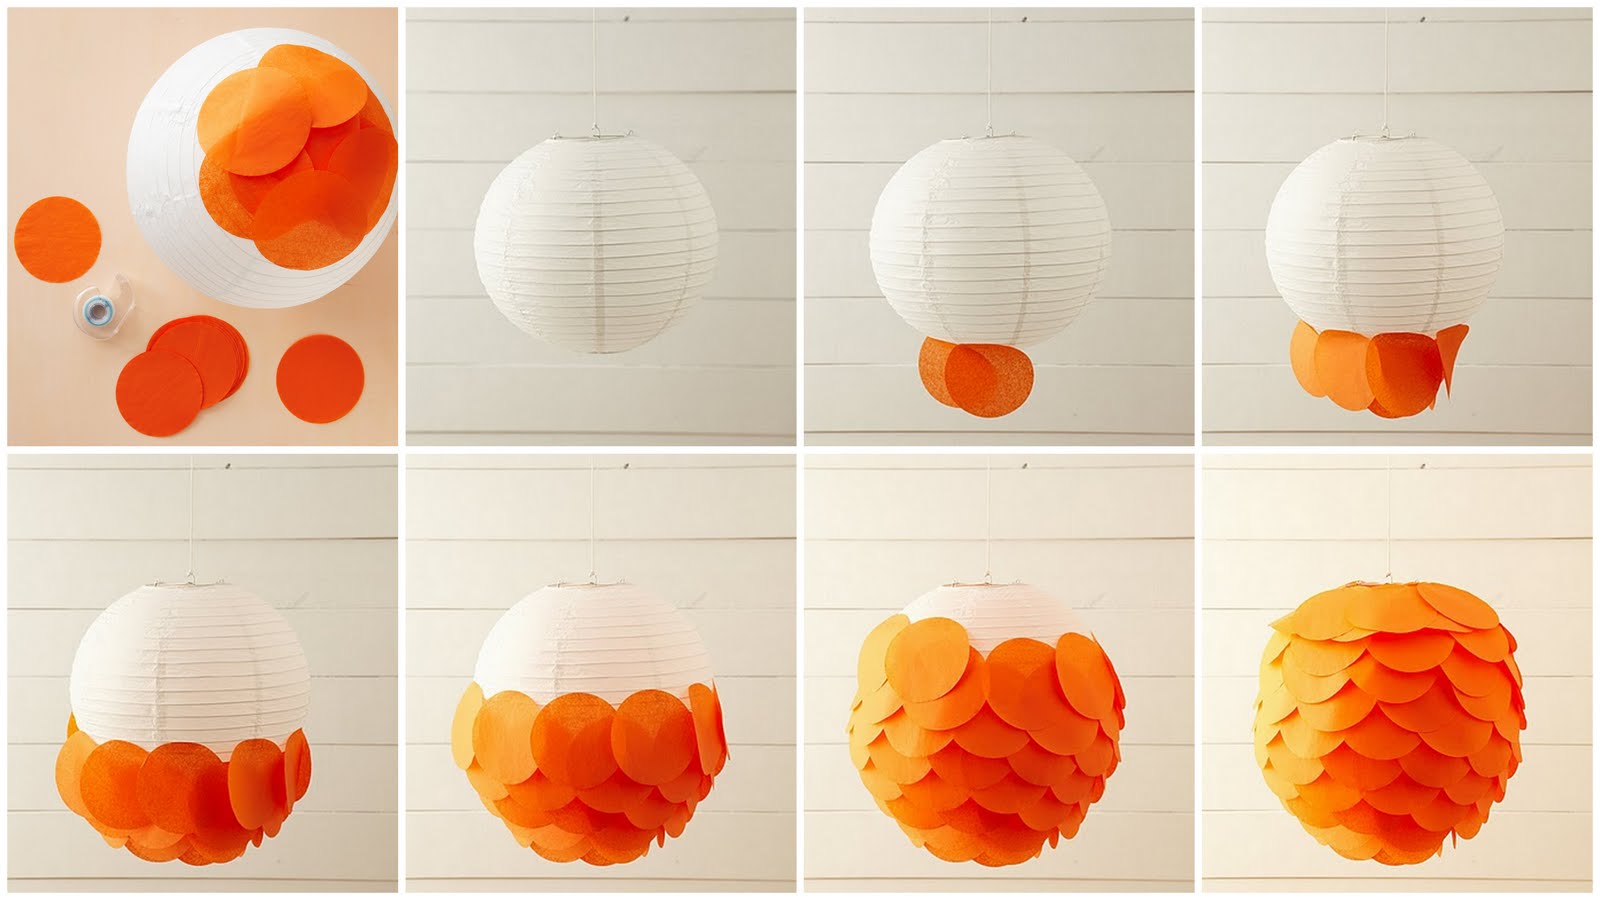 30. Use a paper lantern and add some colorful paper circles for a layered lamp